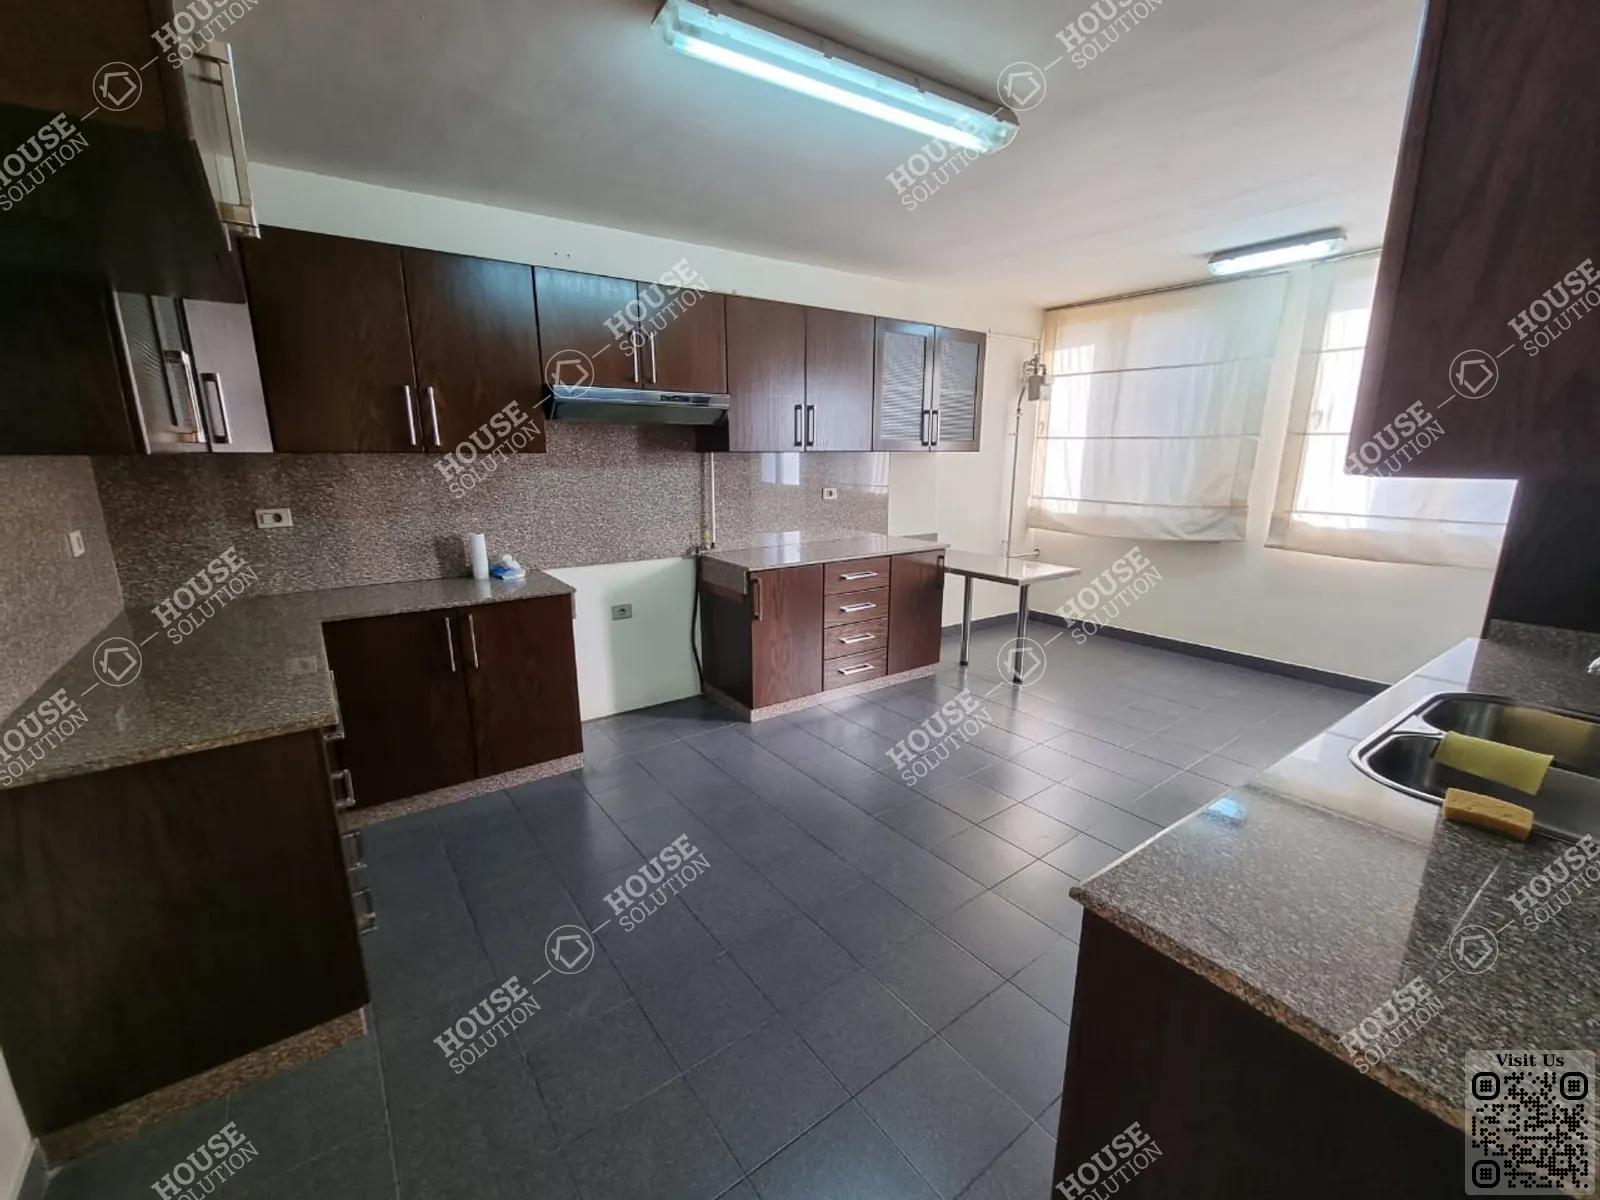 KITCHEN  @ Apartments For Rent In Maadi Maadi Sarayat Area: 350 m² consists of 4 Bedrooms 4 Bathrooms Modern furnished 5 stars #5130-1